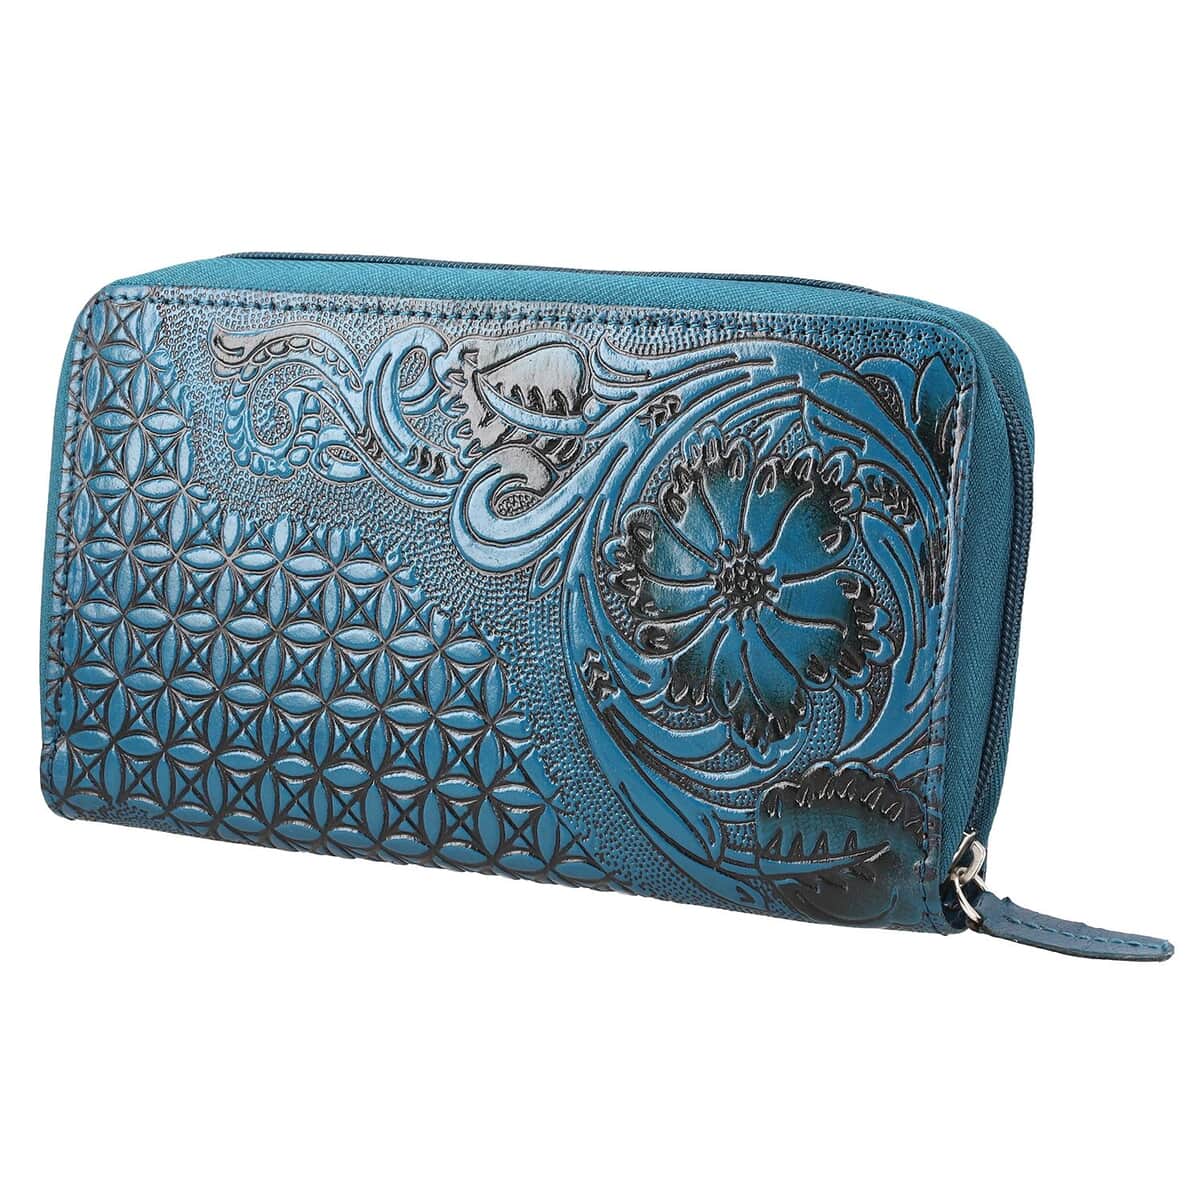 "RFID Protected hand floral embossed Leather Women's Wallet  SIZE: 8(L)x1(W)x4.25(H) inches COLOR: Green" image number 2